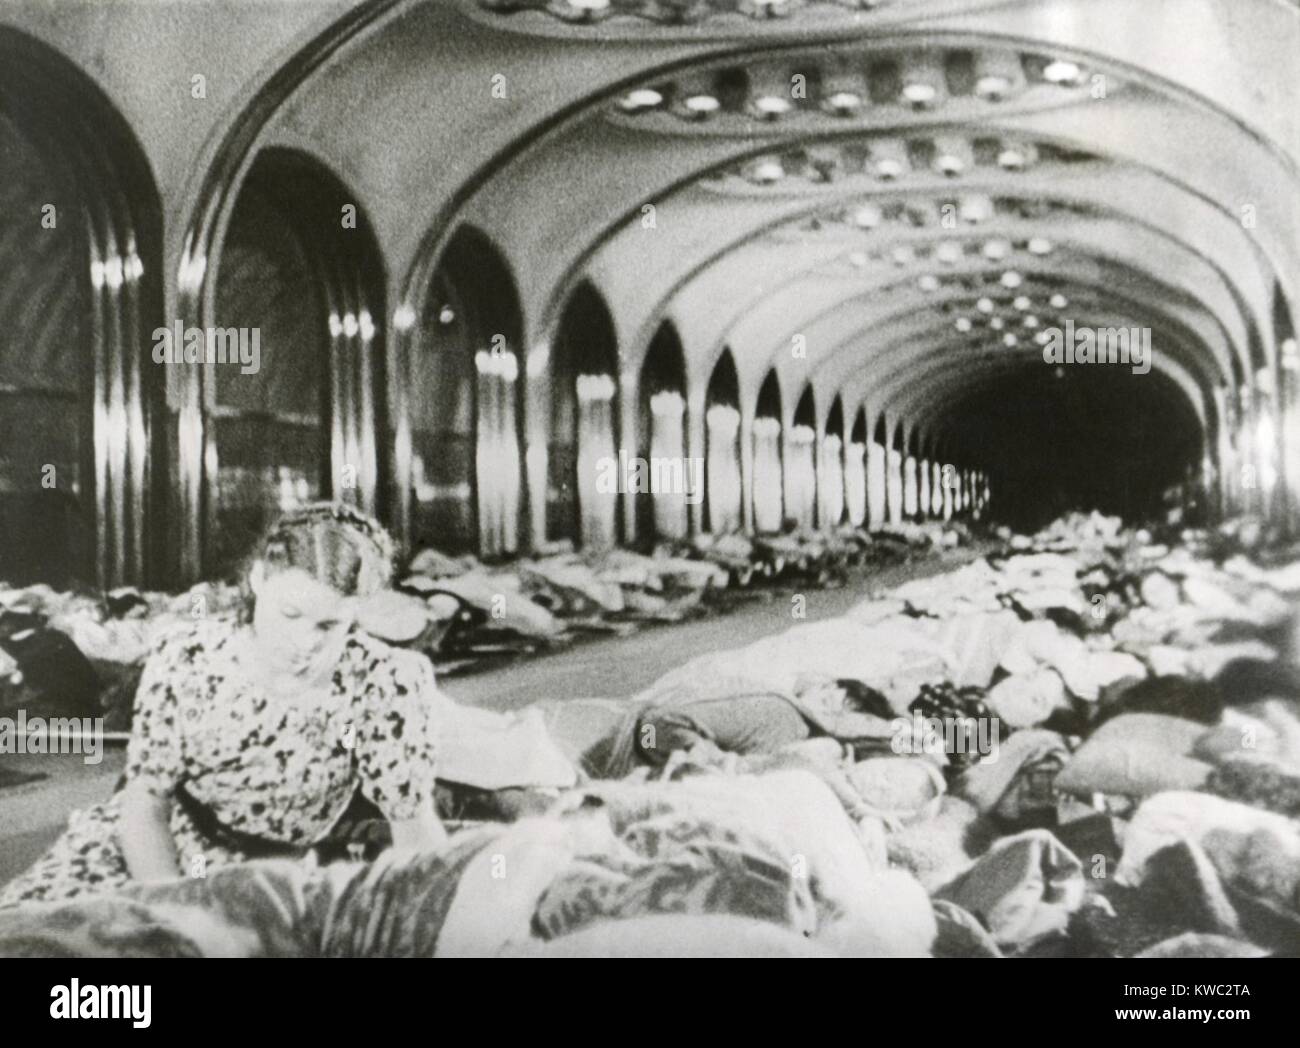 Moscow's subway stations were built for their possible use as air raid shelters. Civilians sleep in a underground station during the Battle of Moscow from Oct. 1941 to Jan. 1942. World War 2 (BSLOC 2015 13 107) Stock Photo